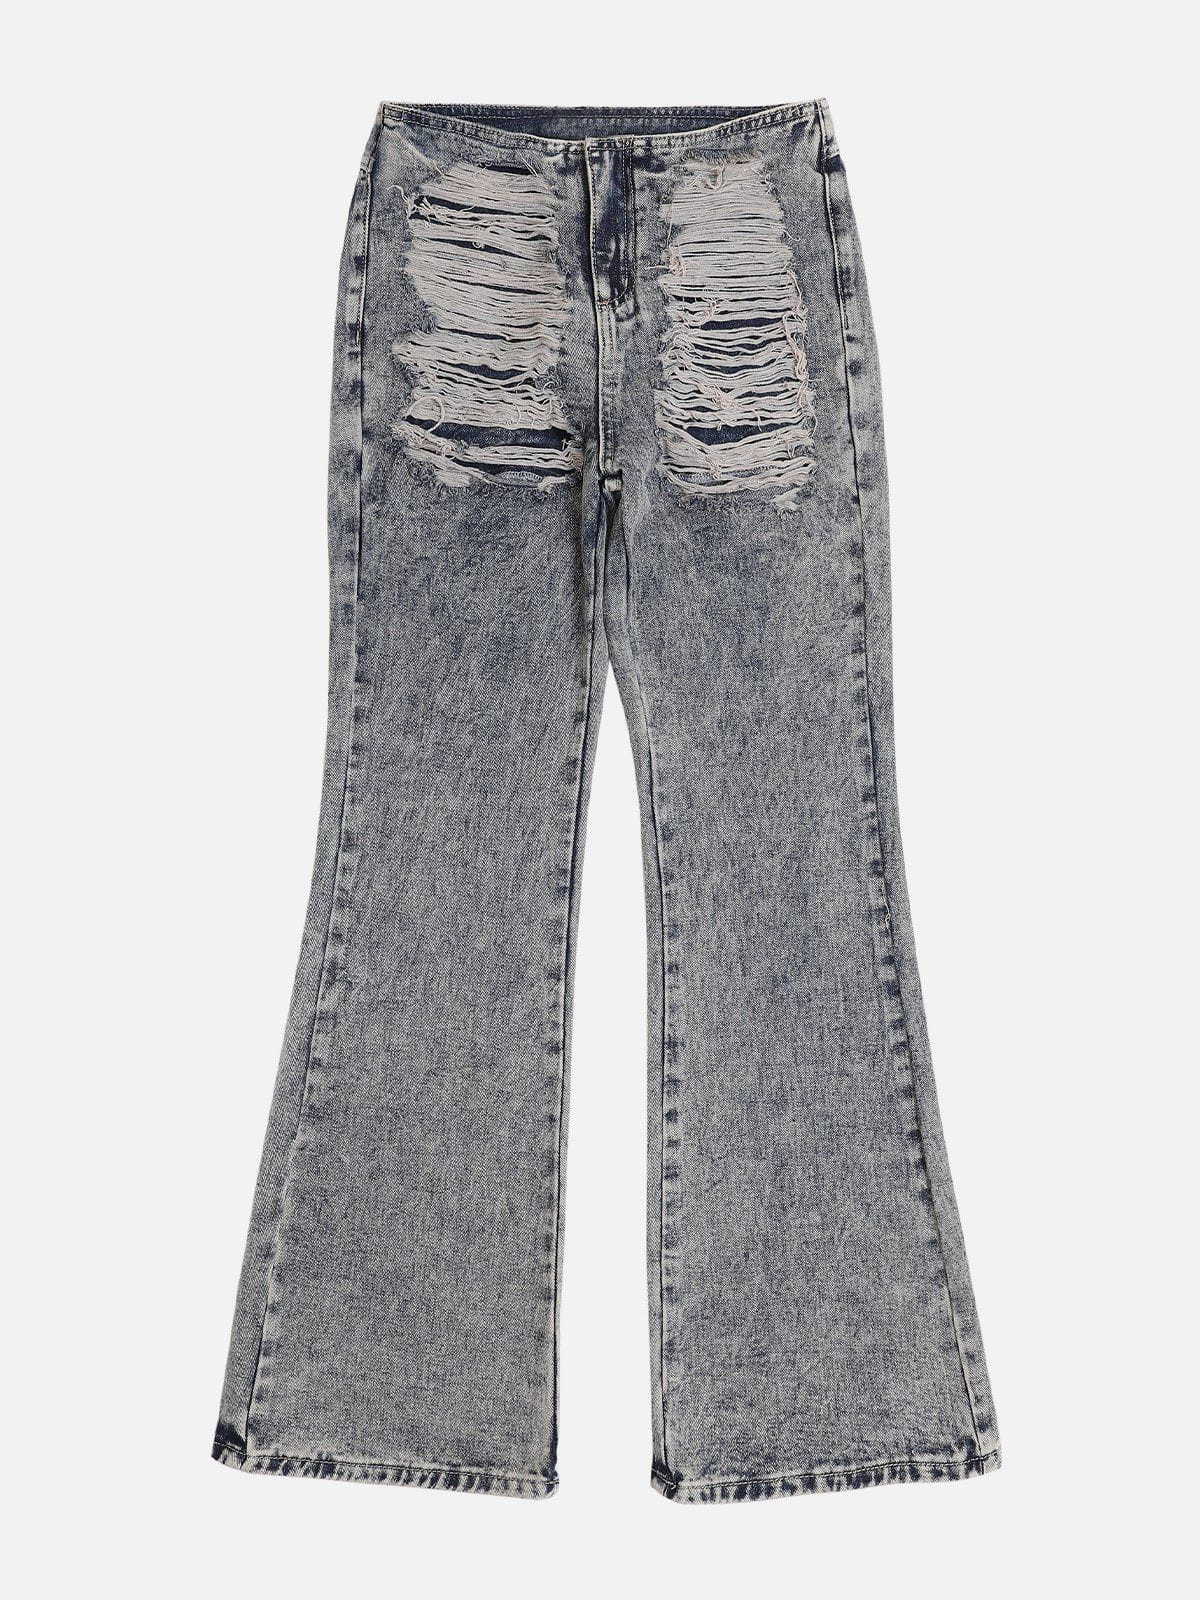 Distressed Washed Jeans Faire Echo